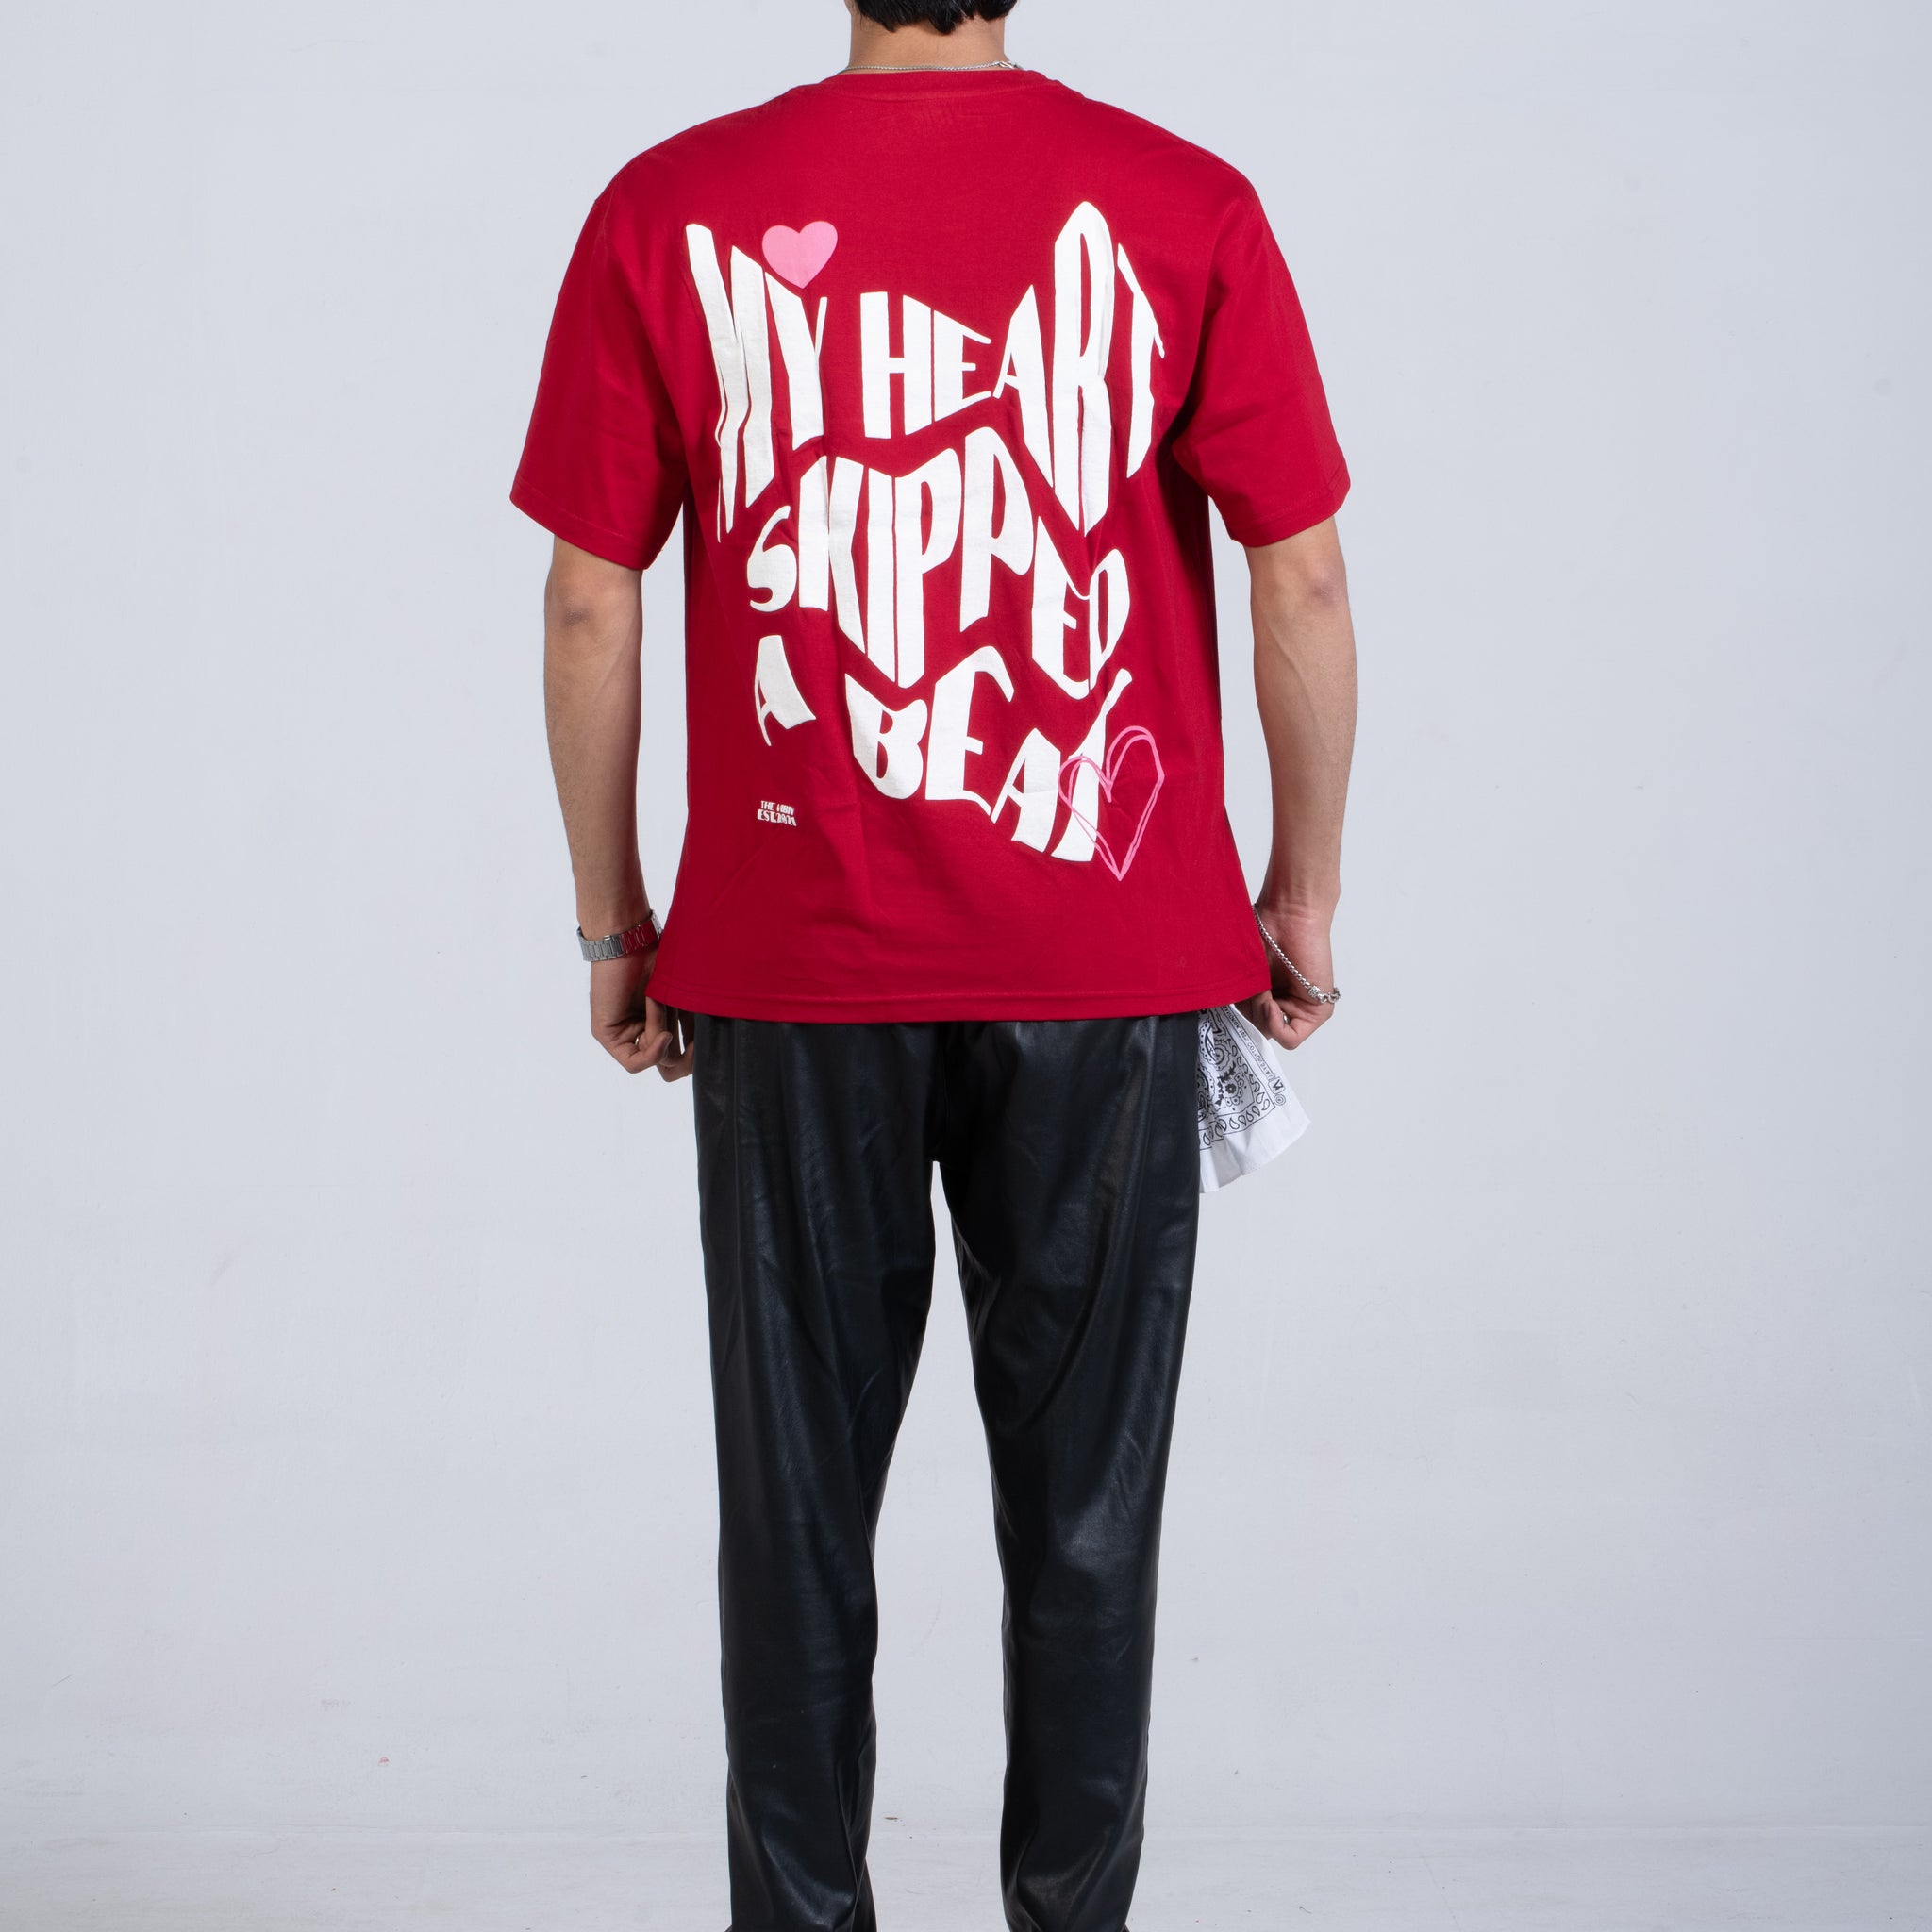 MY HEART SKIPED A BEAT OVERSIZED T-SHIRT - RED